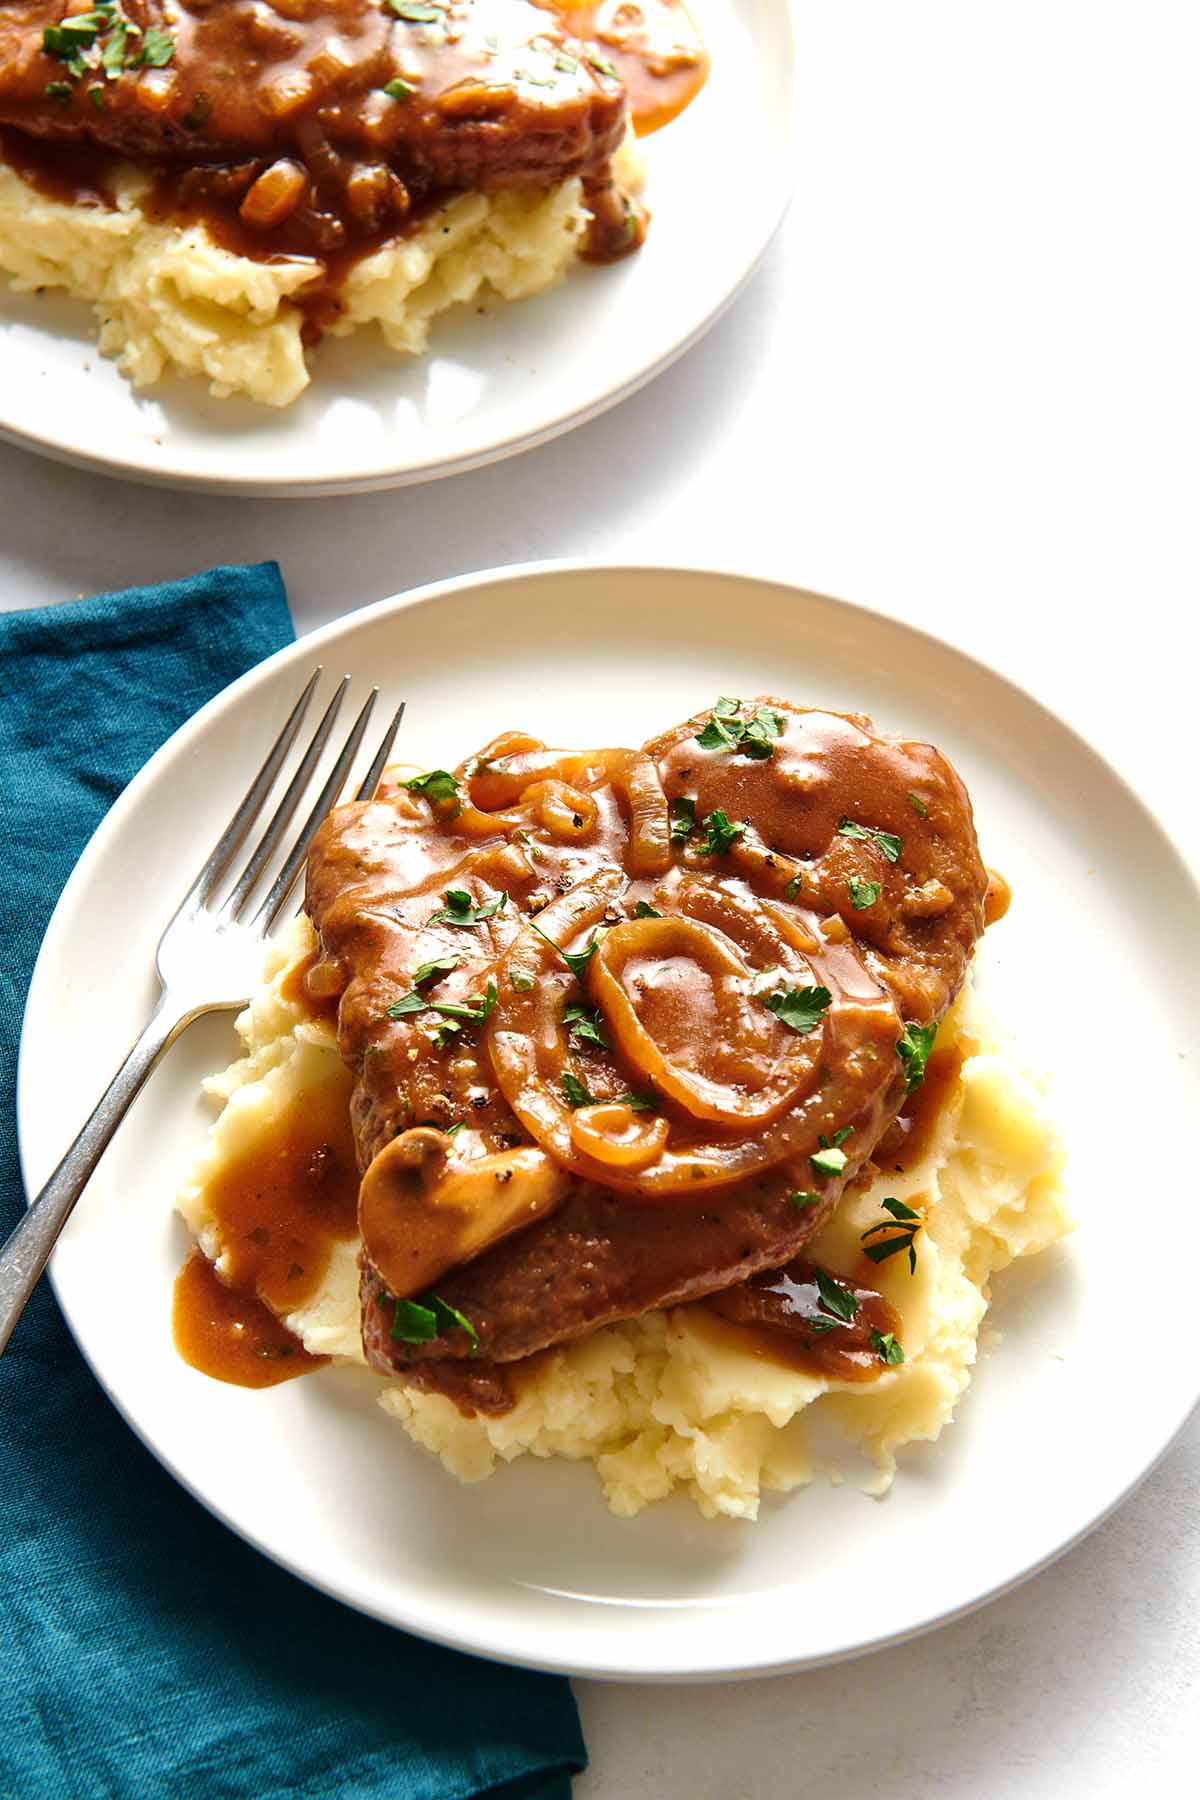 cube steak and gravy over mashed potatoes.